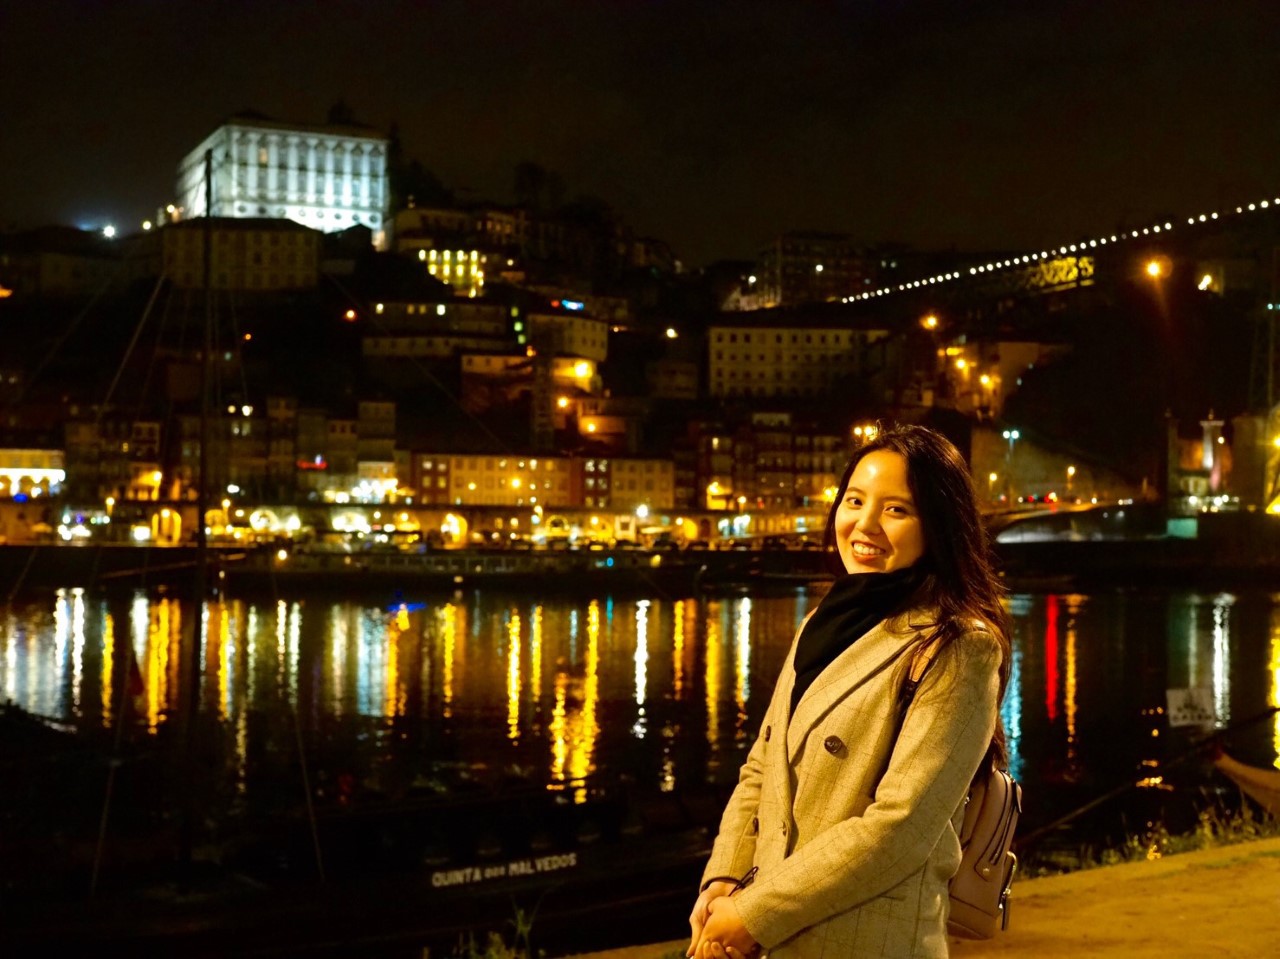 Estelle with at night time with building lights reflecting off of the river in the background